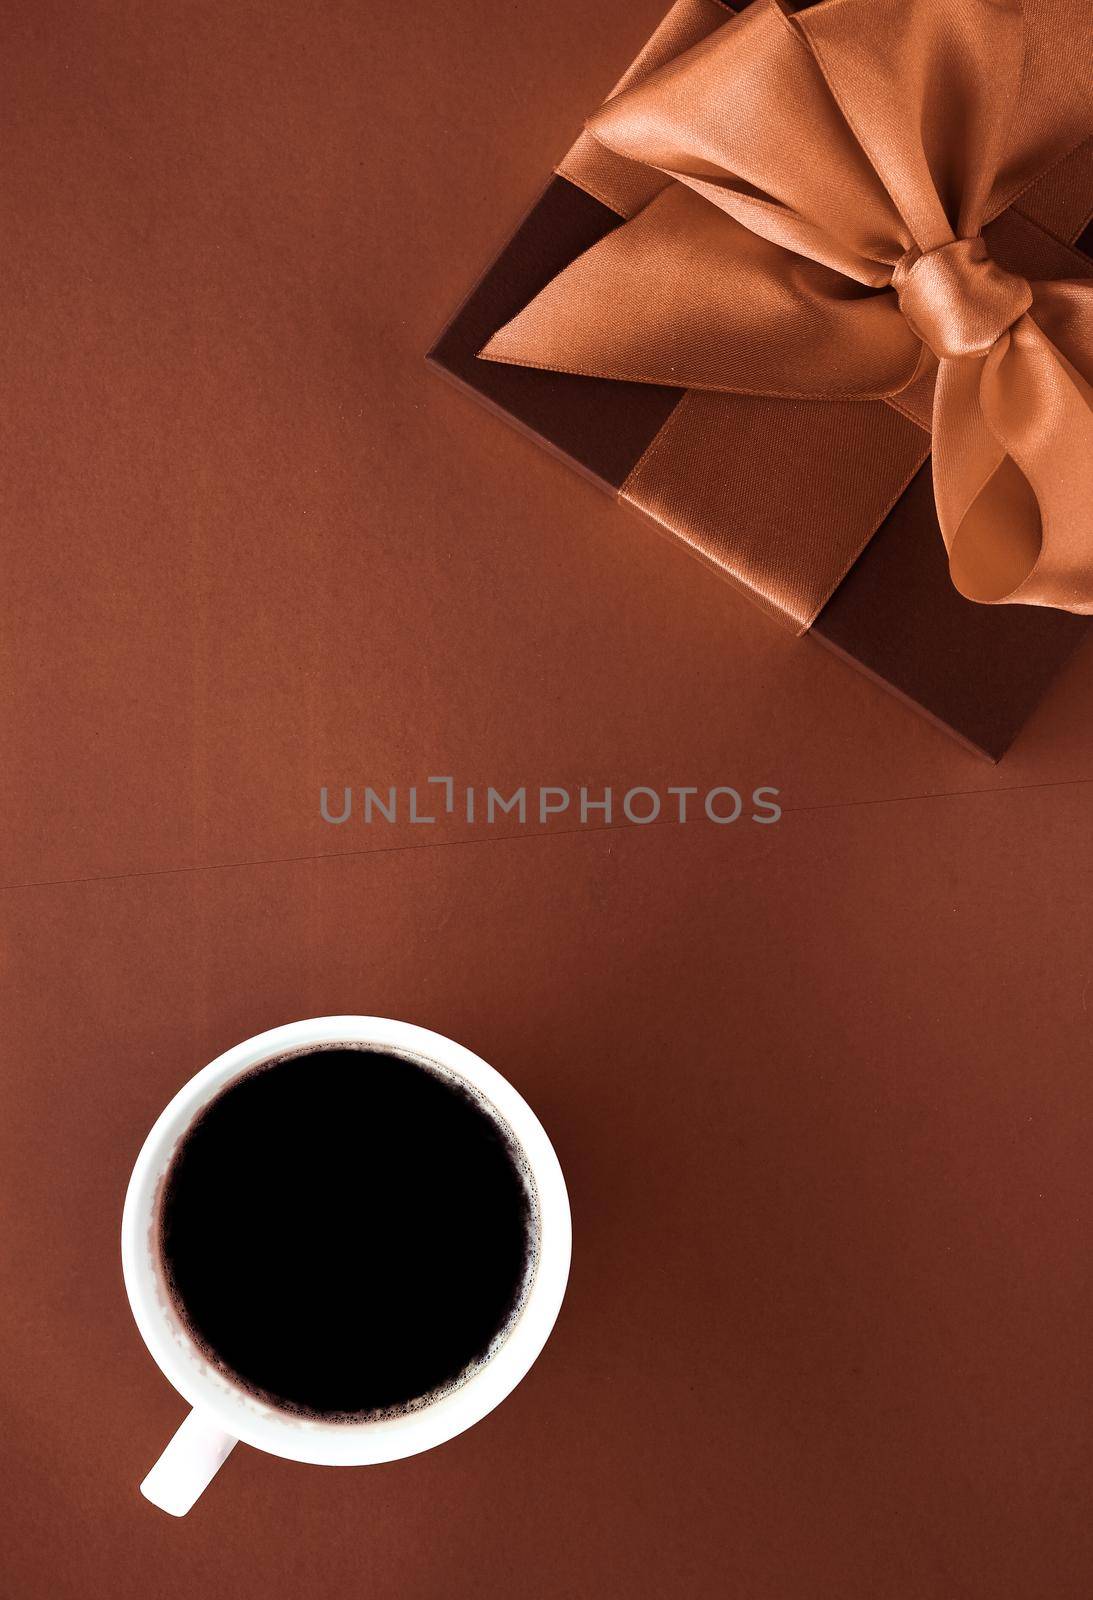 Romantic present, cafe backdrop and drink concept - Coffee cup and luxury gift box flatlay background